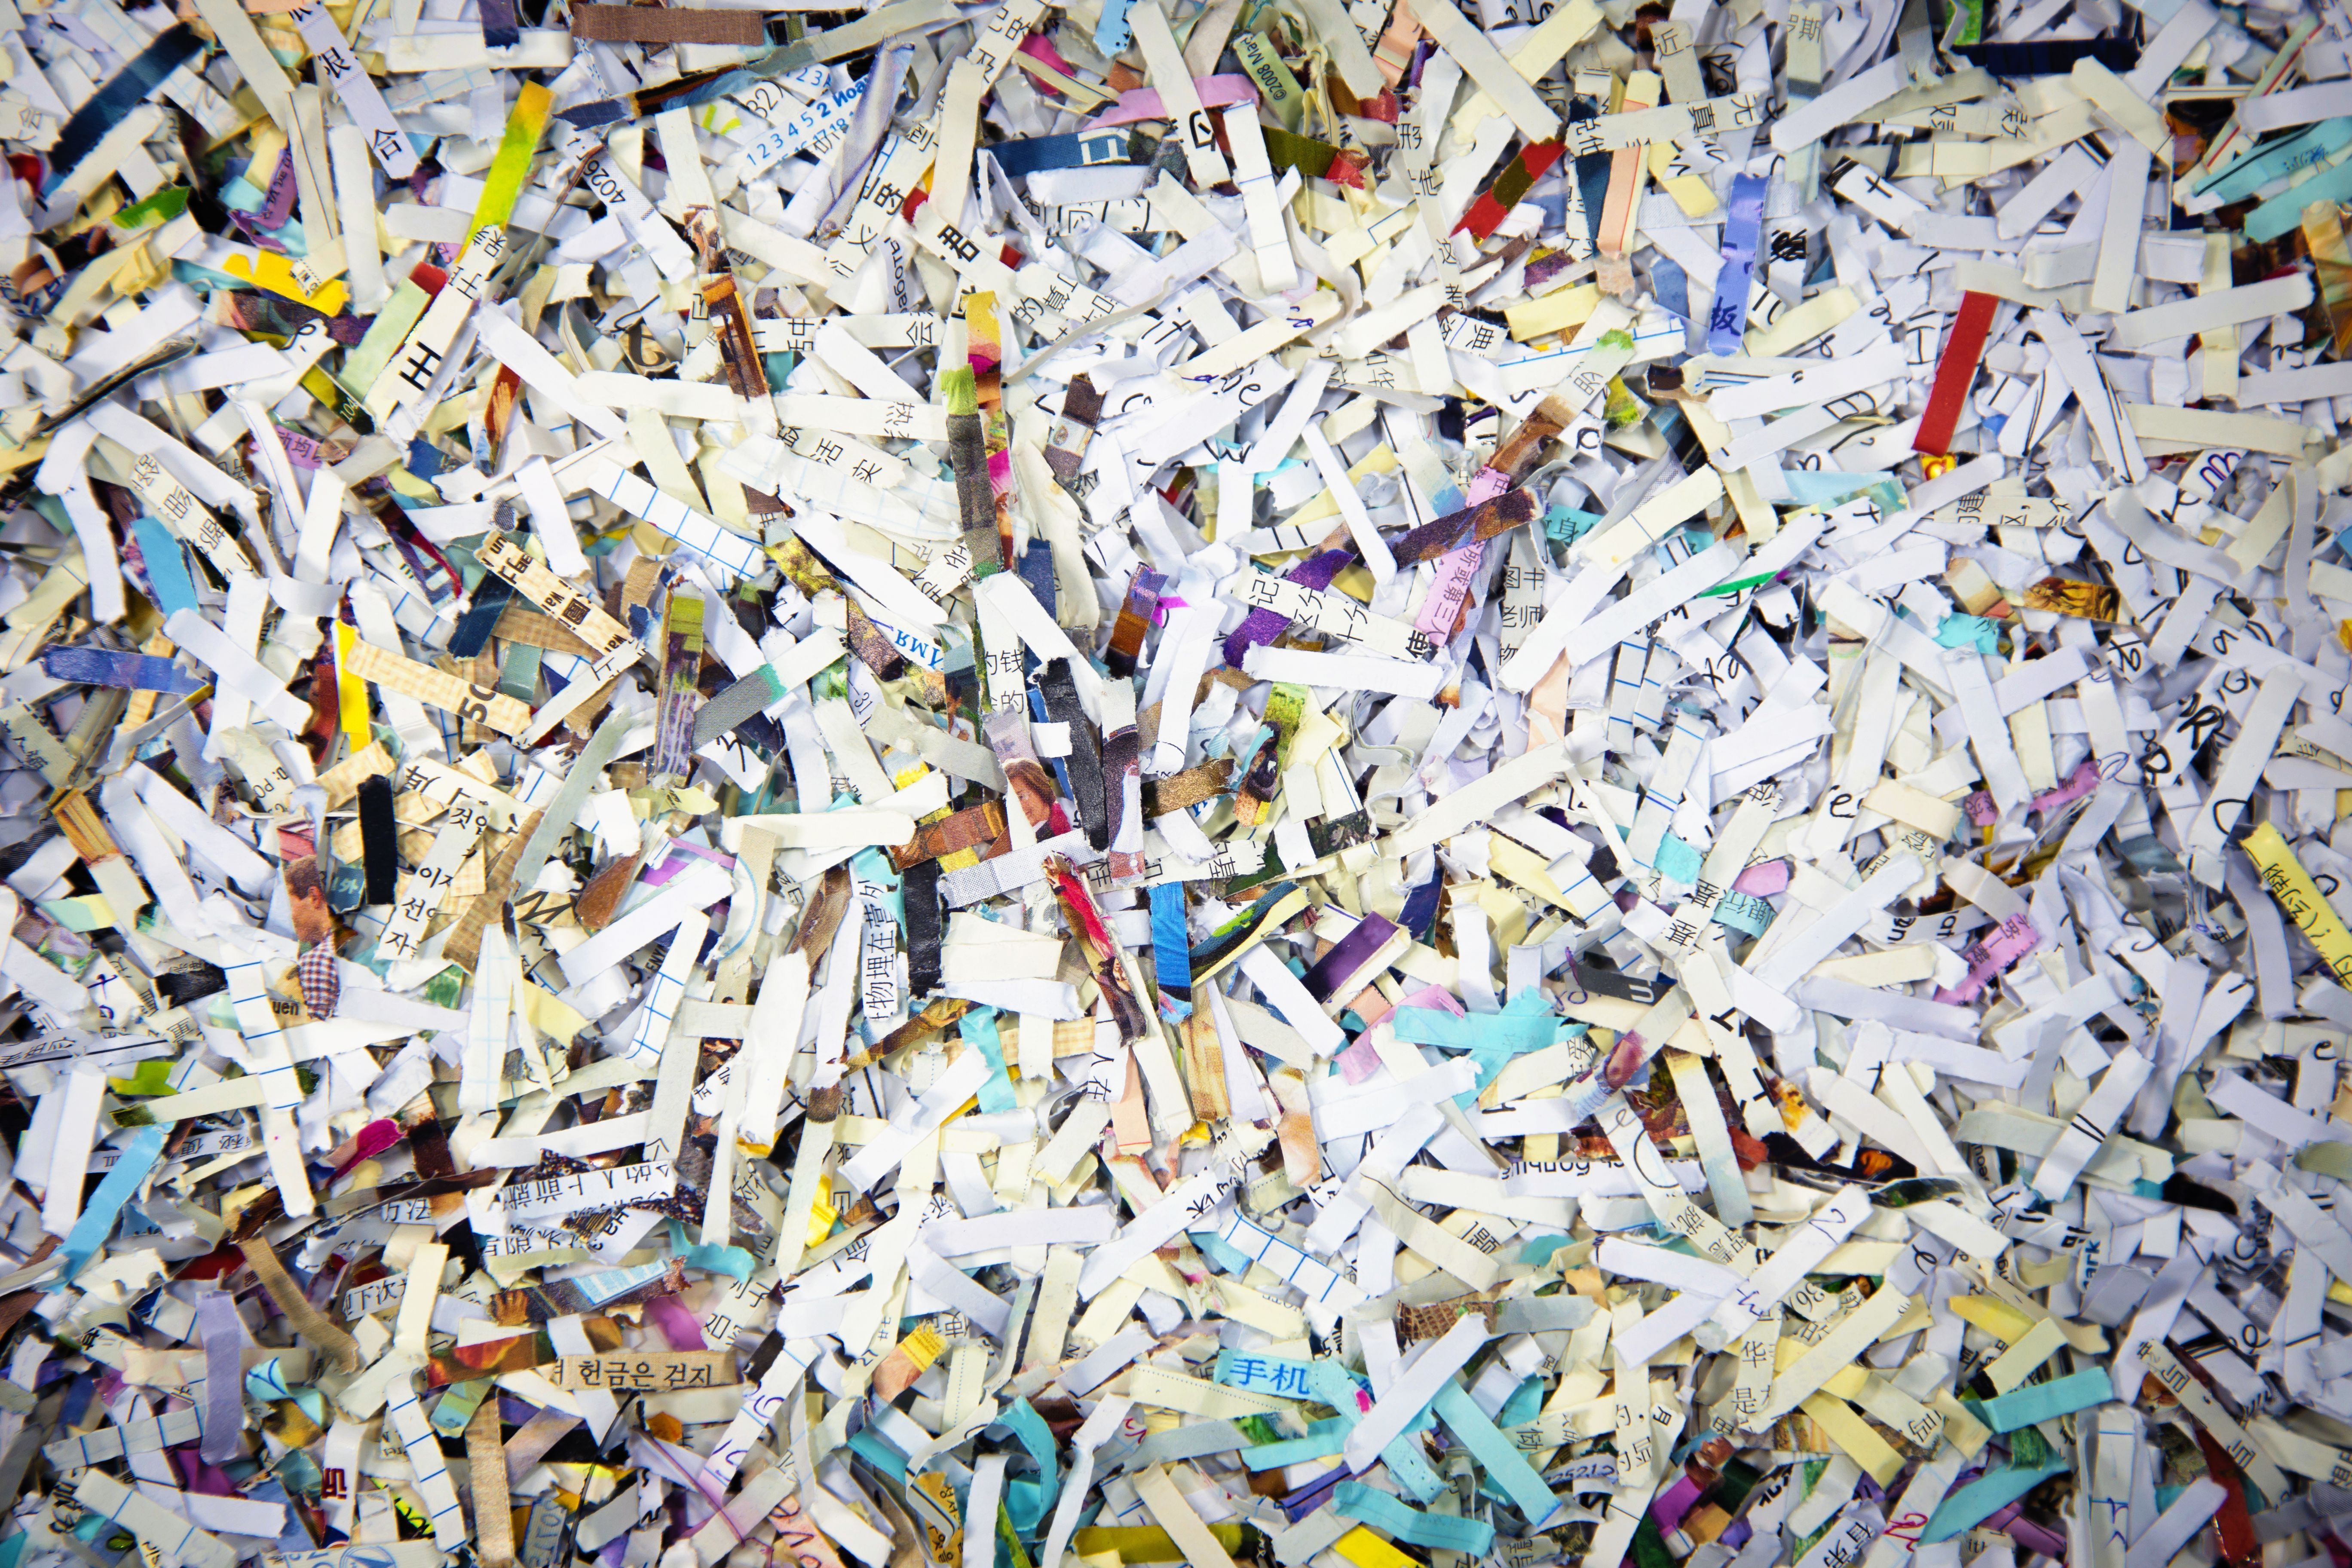 Beaufort County Offers Free Secure Shredding Event In Bluffton June 6